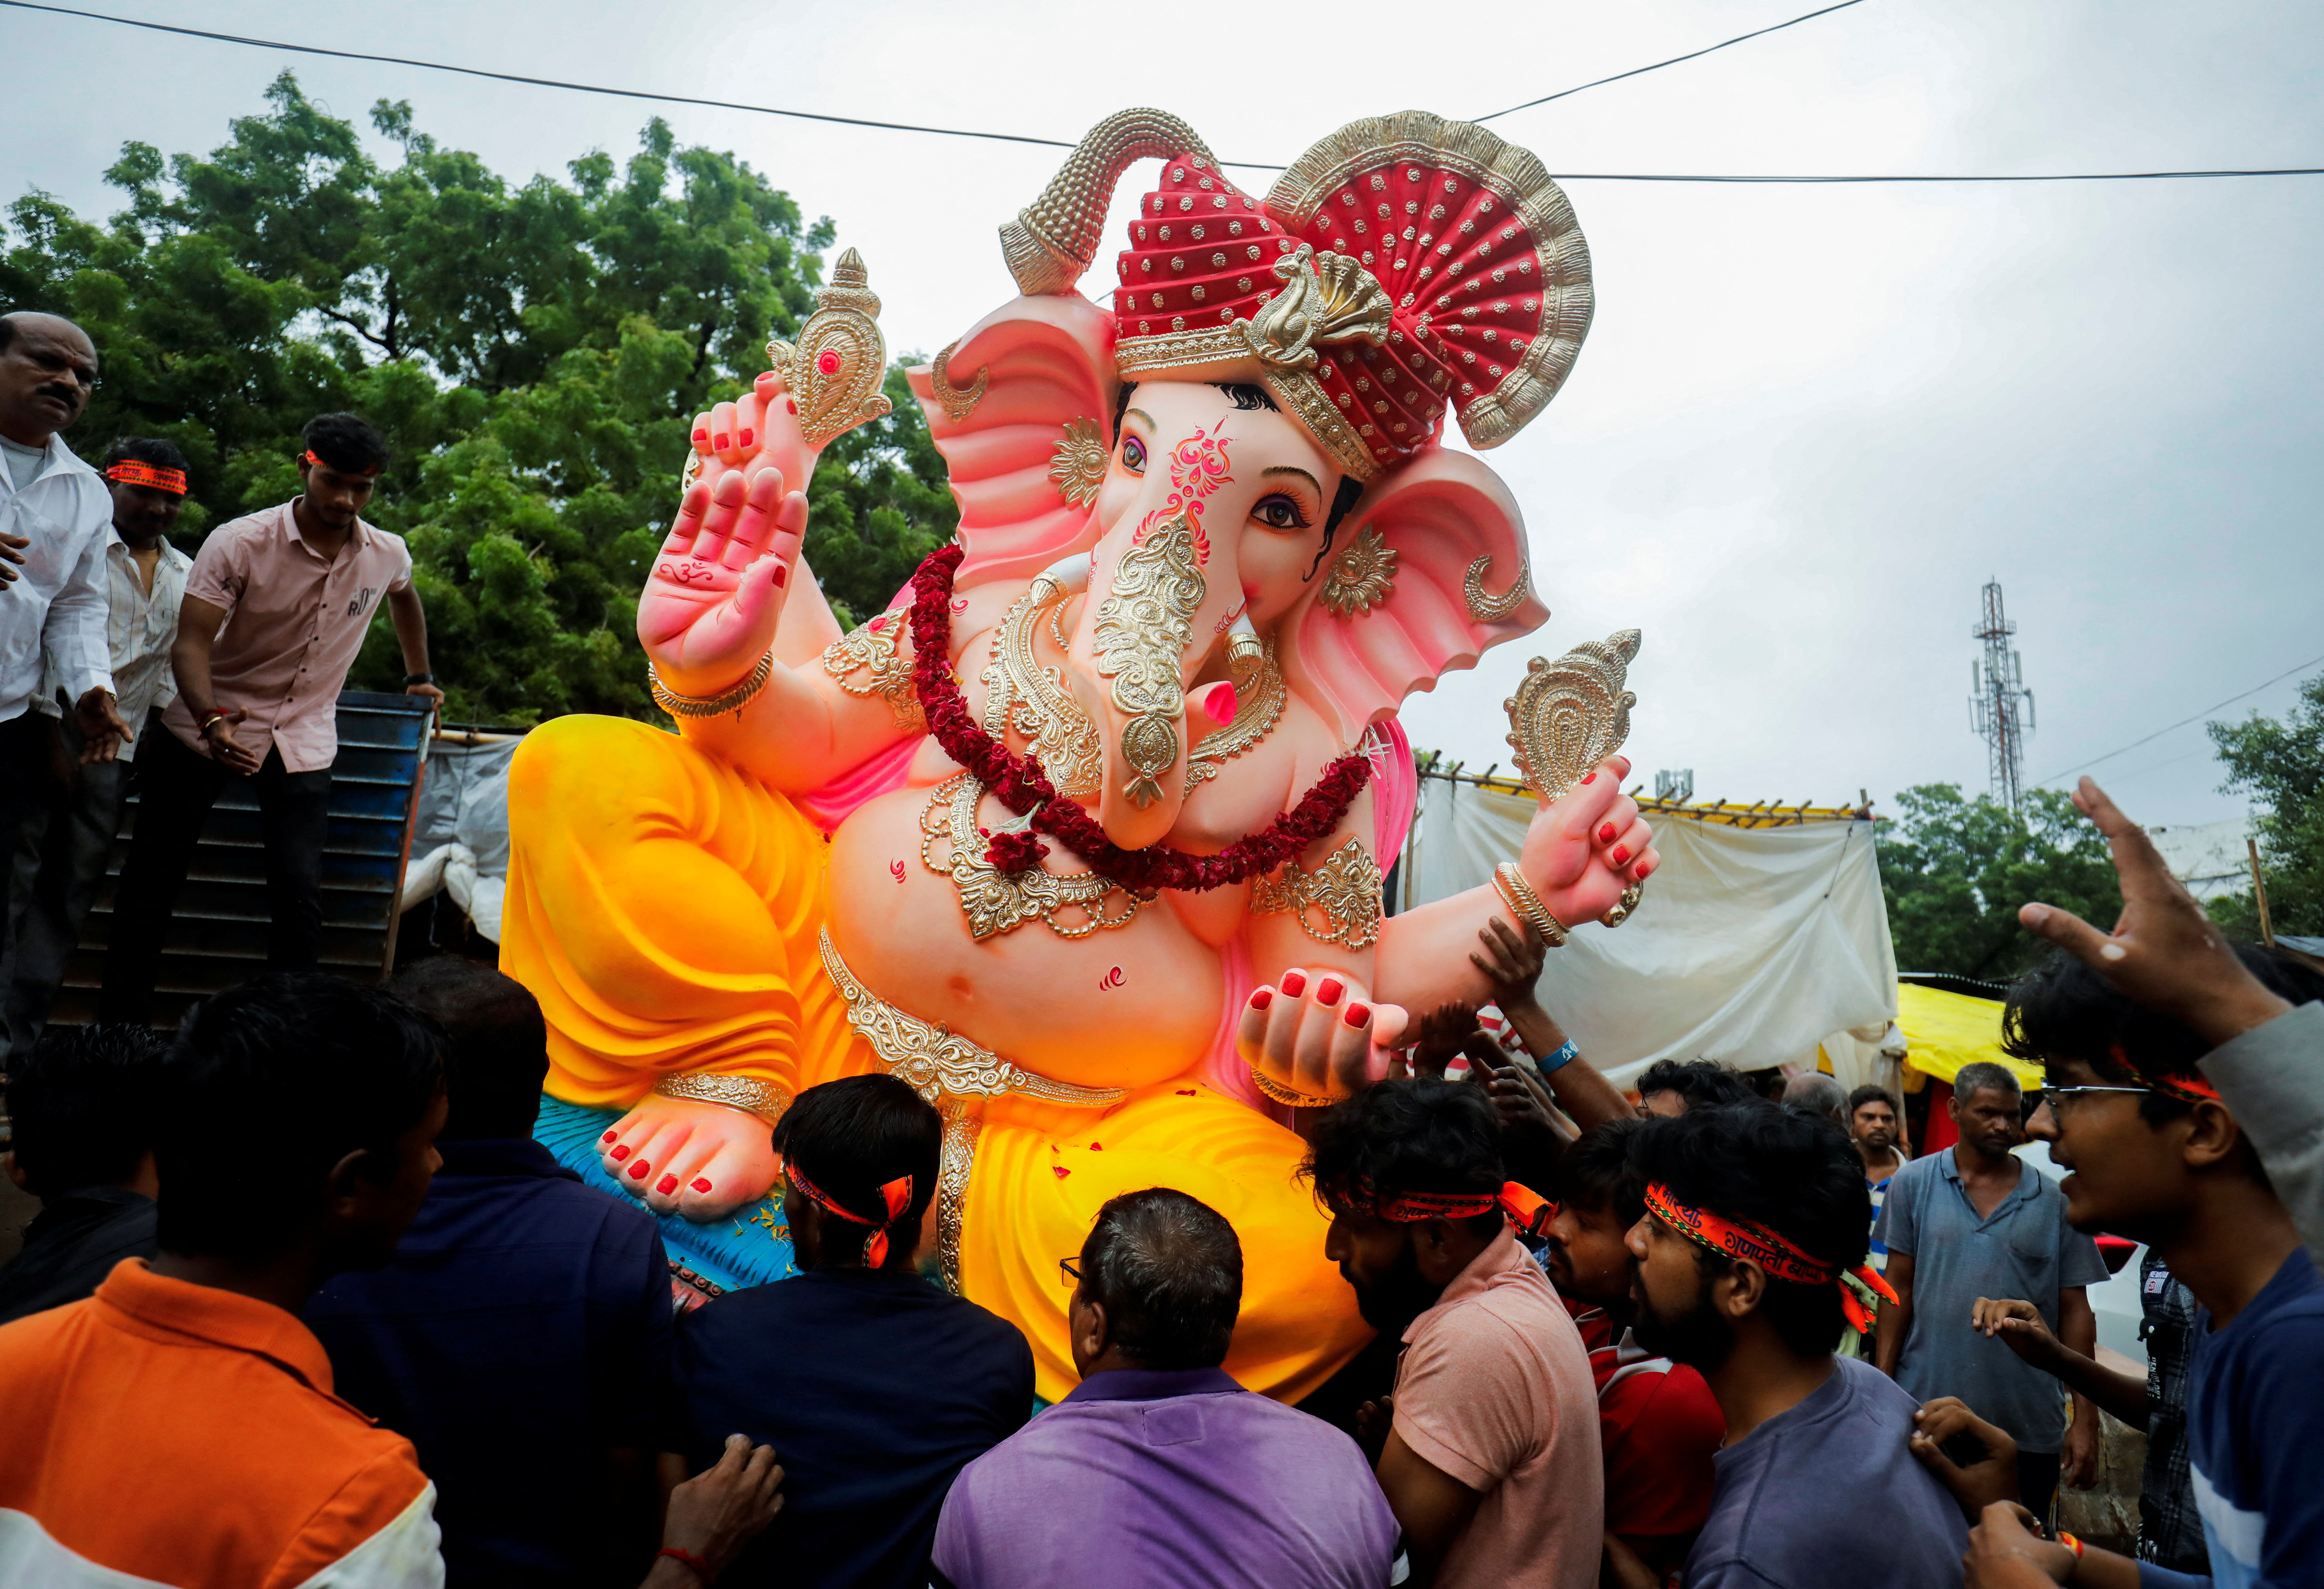 Devotees load an idol of the Hindu god Ganesh onto a truck to be transported to a place of worship during ten-day-long Ganesh Chaturthi festival in Ahmedabad